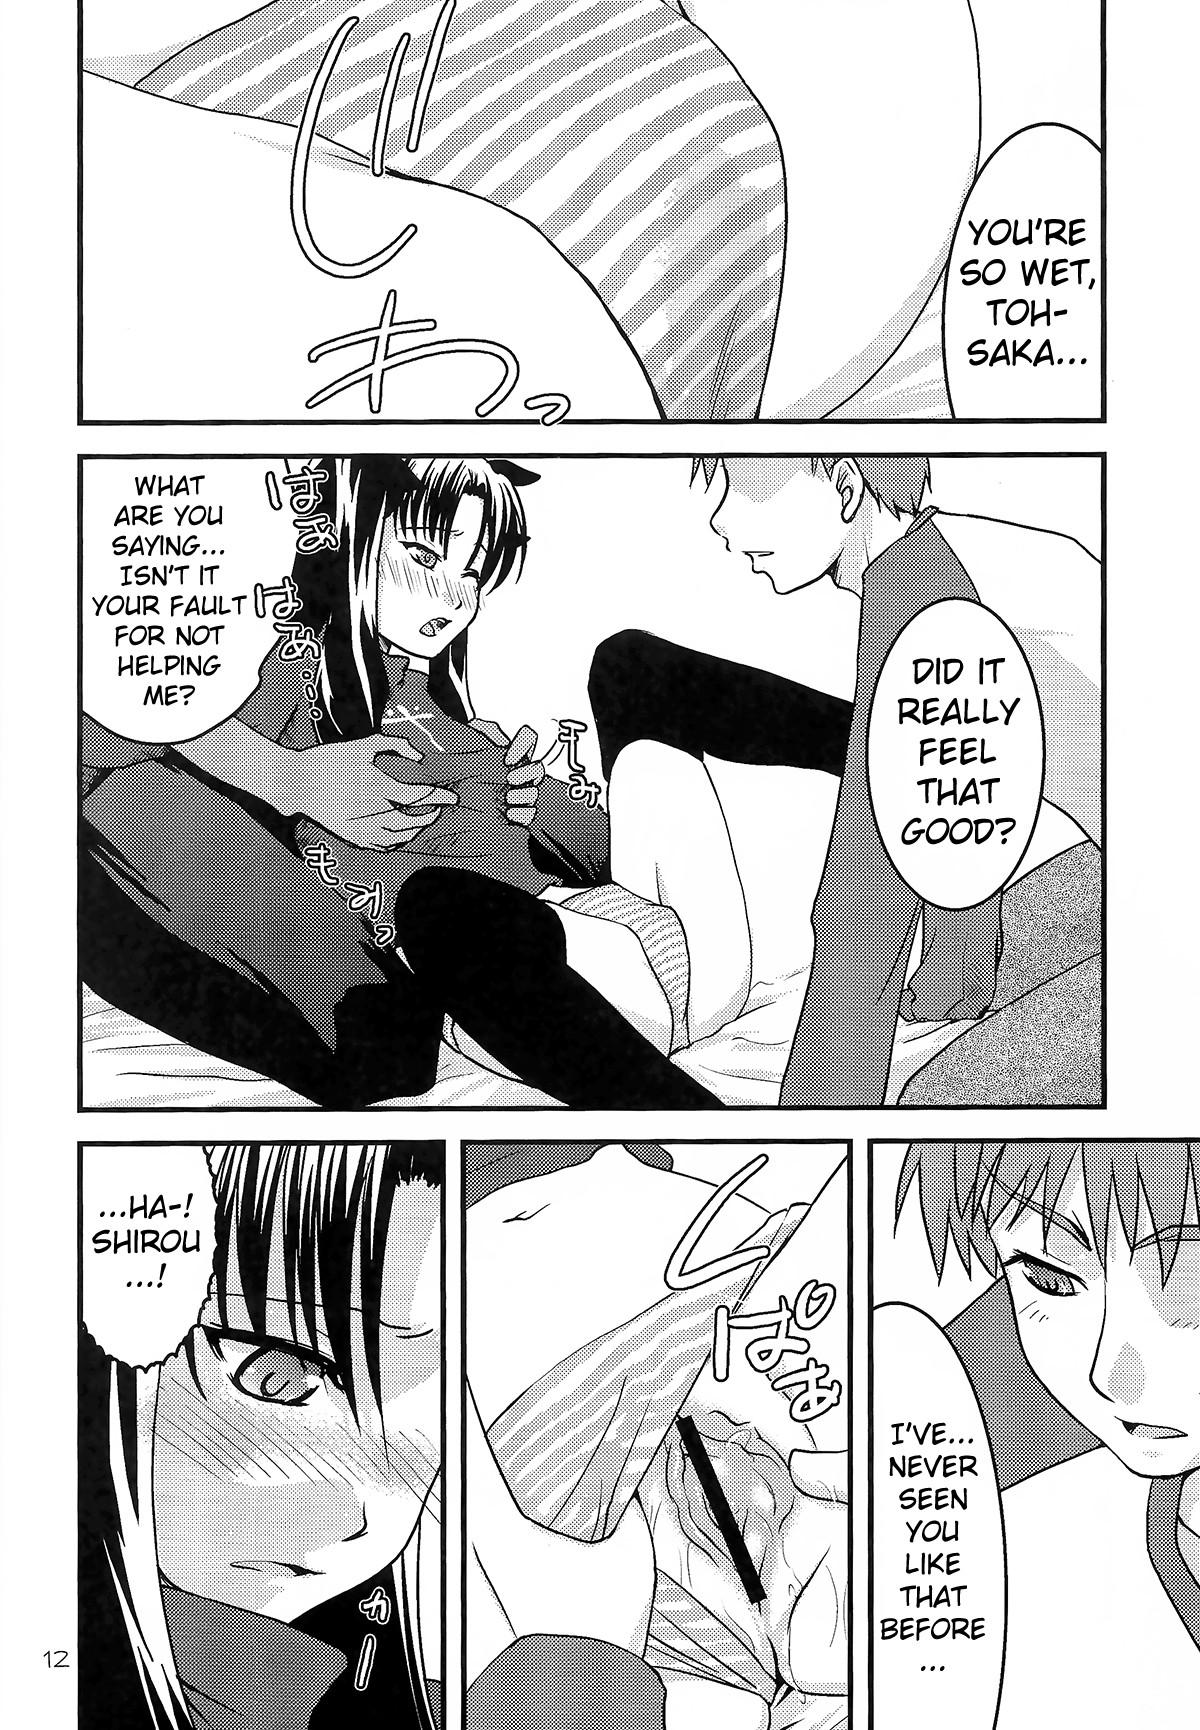 Bare Fakers - Fate stay night Moneytalks - Page 11